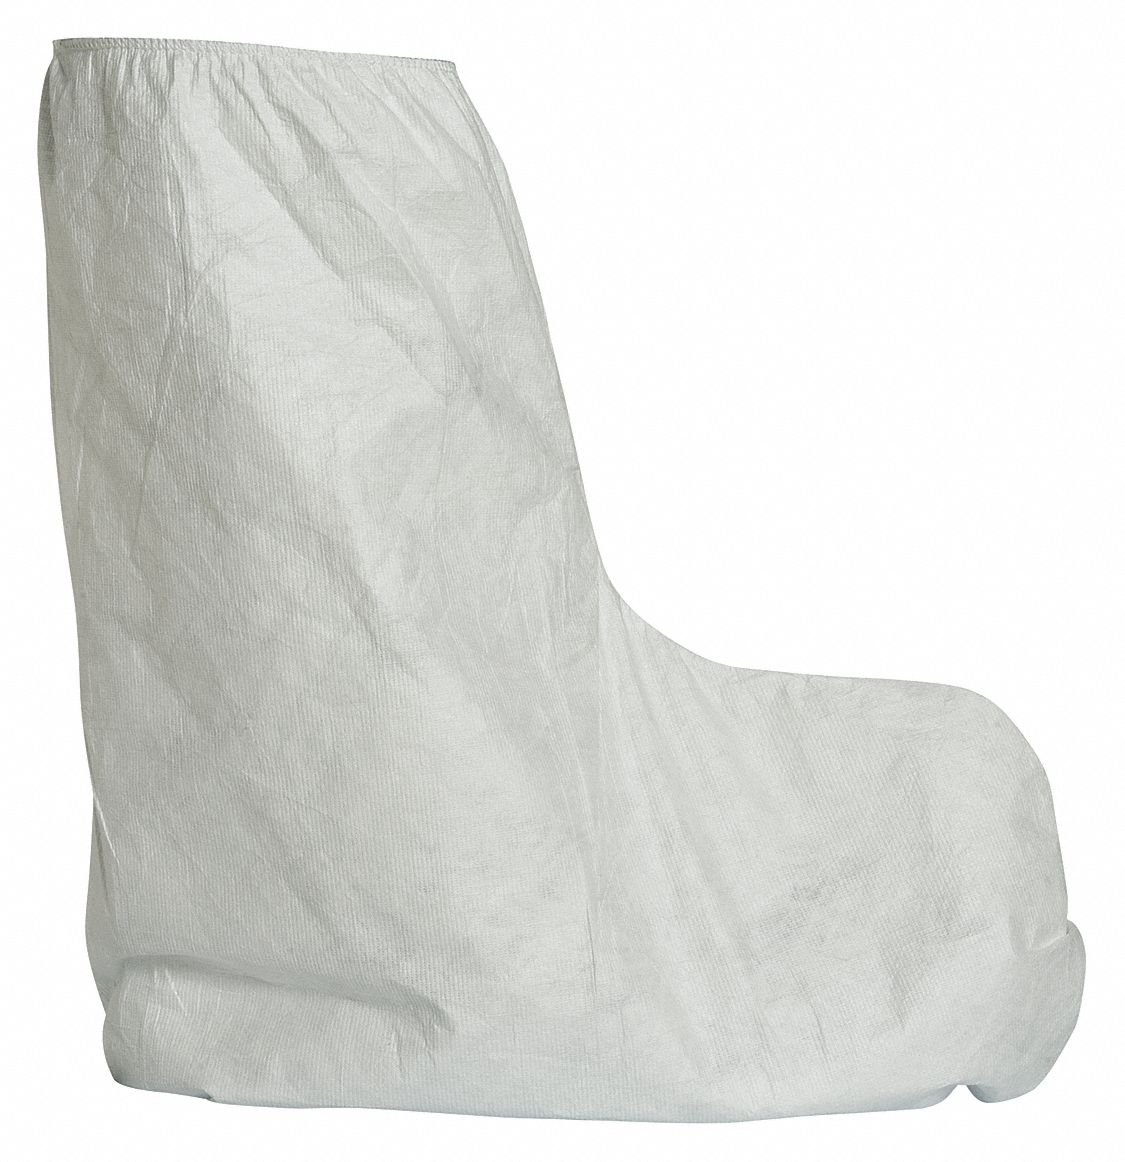 L Shoe Covers, Slip Resistant Sole: Yes, Waterproof: Yes, 18" Height